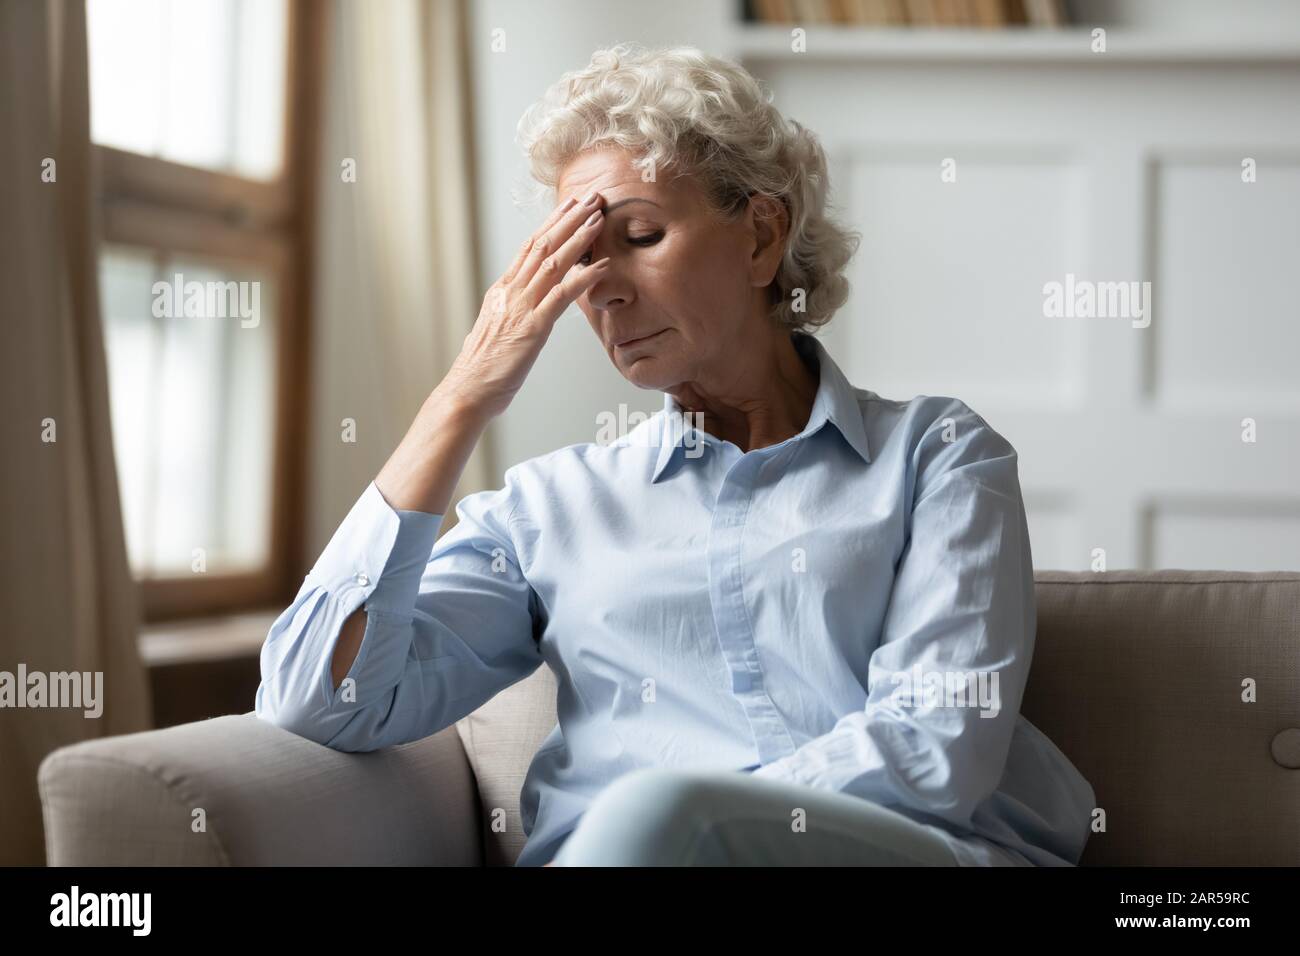 Frustrated nervous middle aged hoary woman touching forehead. Stock Photo